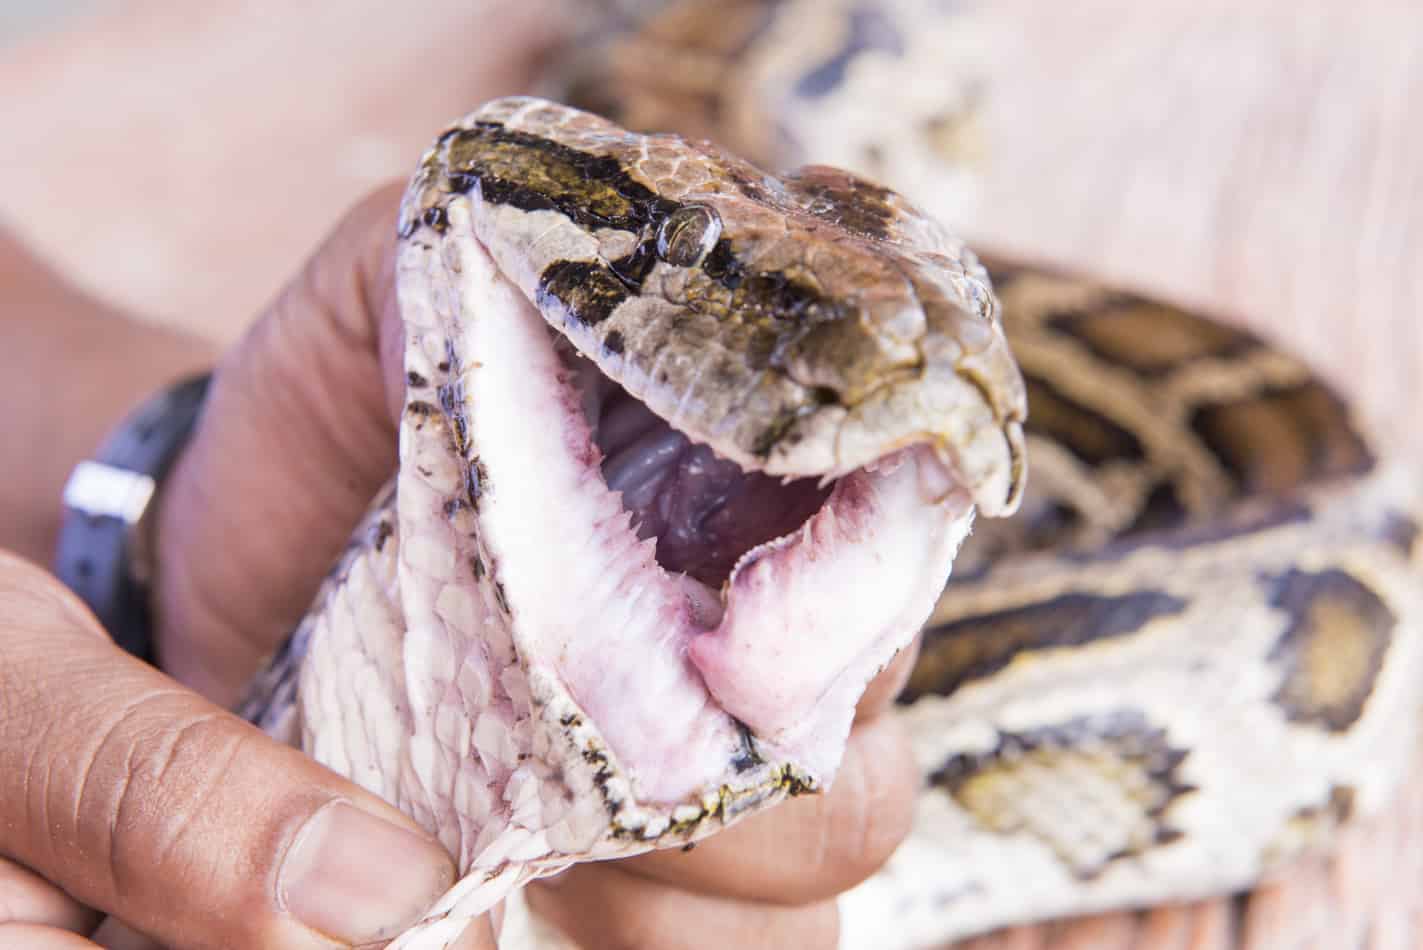 29 interesting facts about burmese pythons 4 29 Interesting Facts About Burmese Pythons (With Pictures)